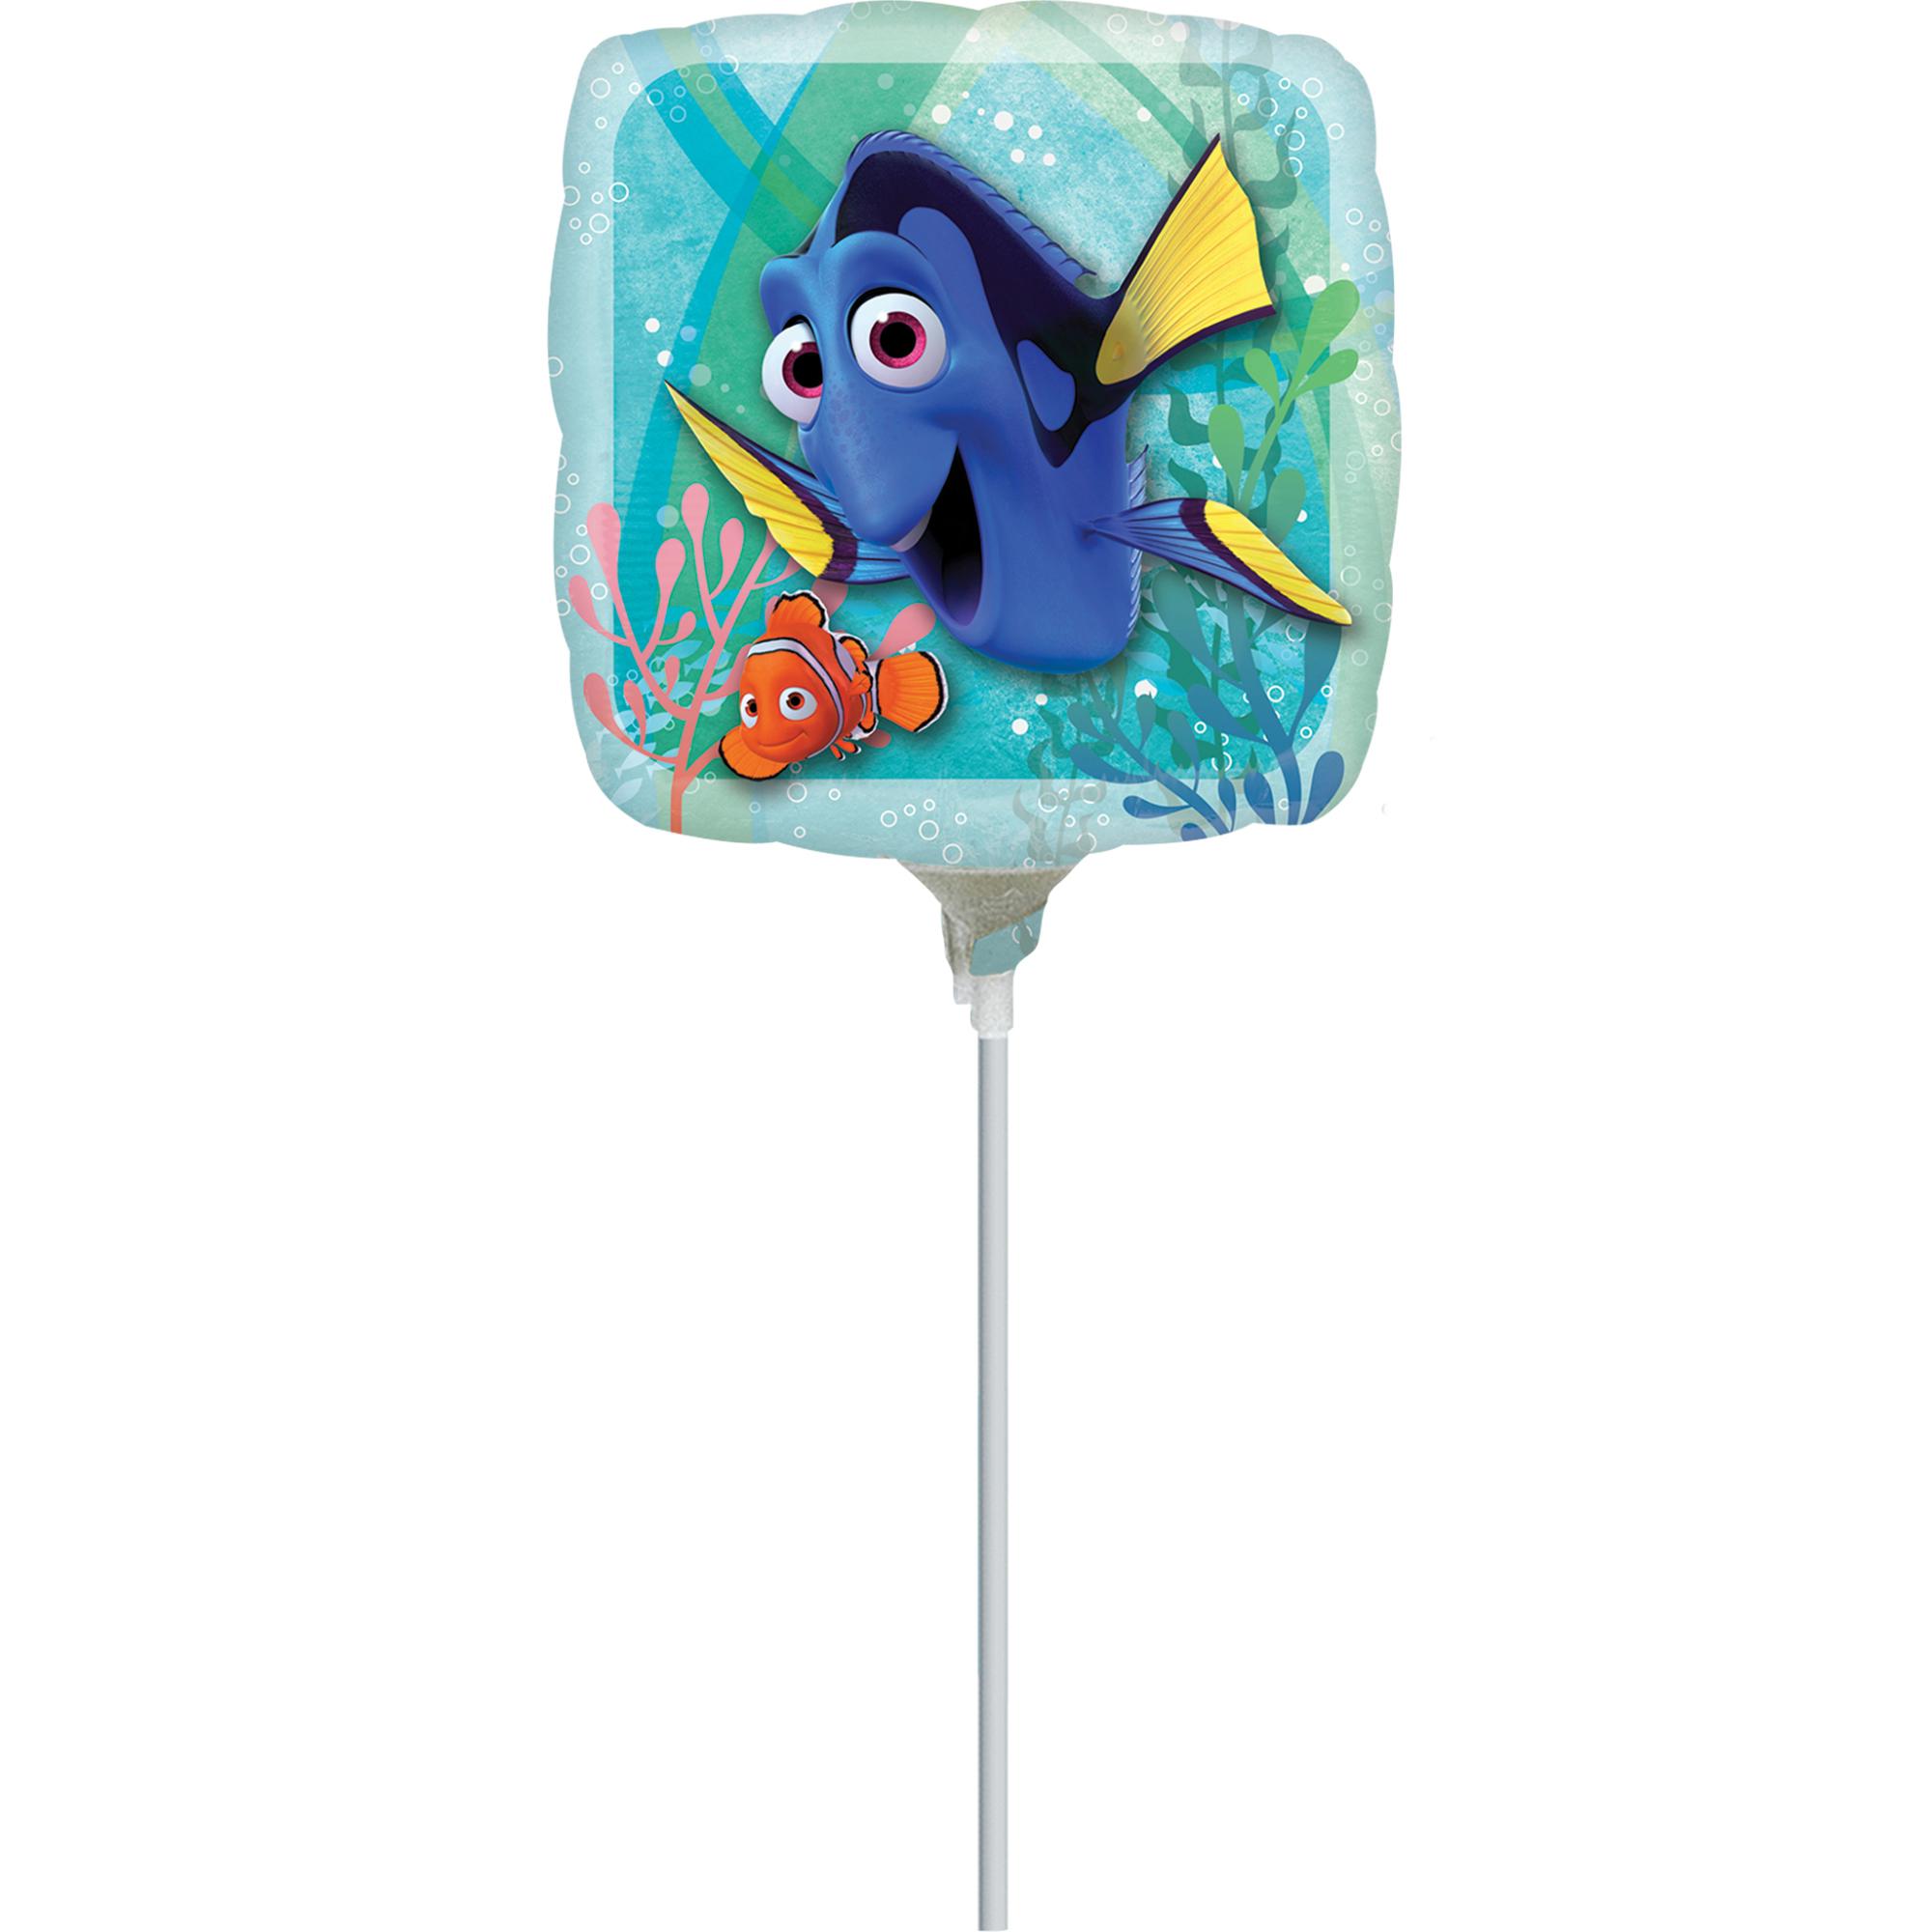 Finding Dory Square Foil Balloon 9in Balloons & Streamers - Party Centre - Party Centre